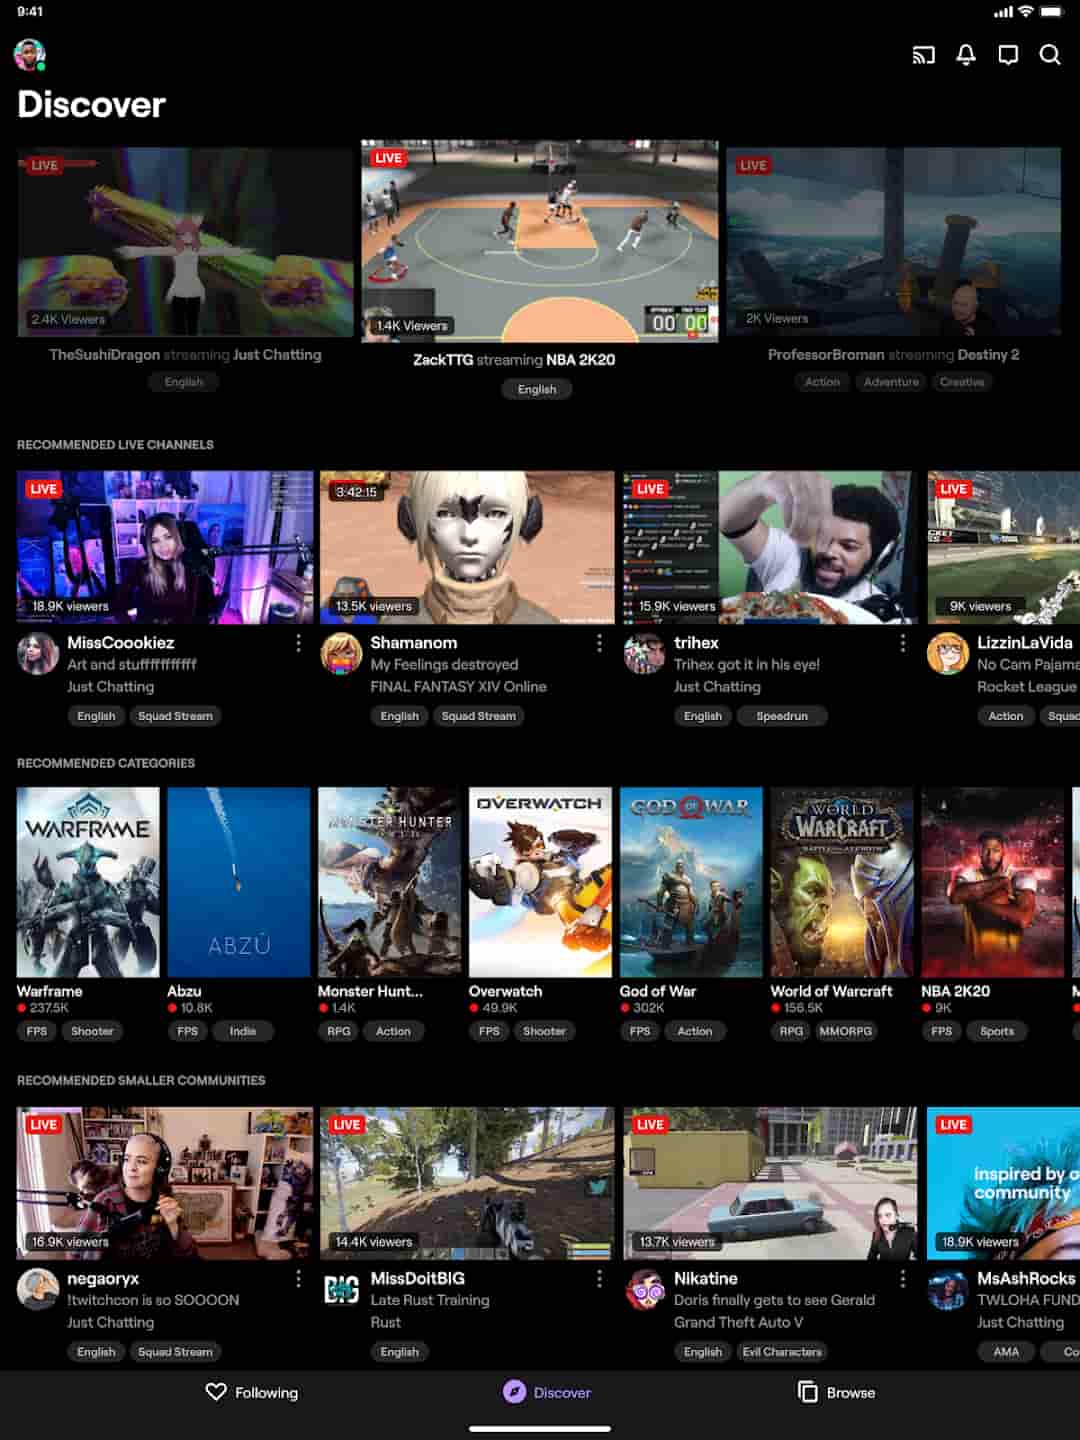 Amazing Features of Twitch MOD APK